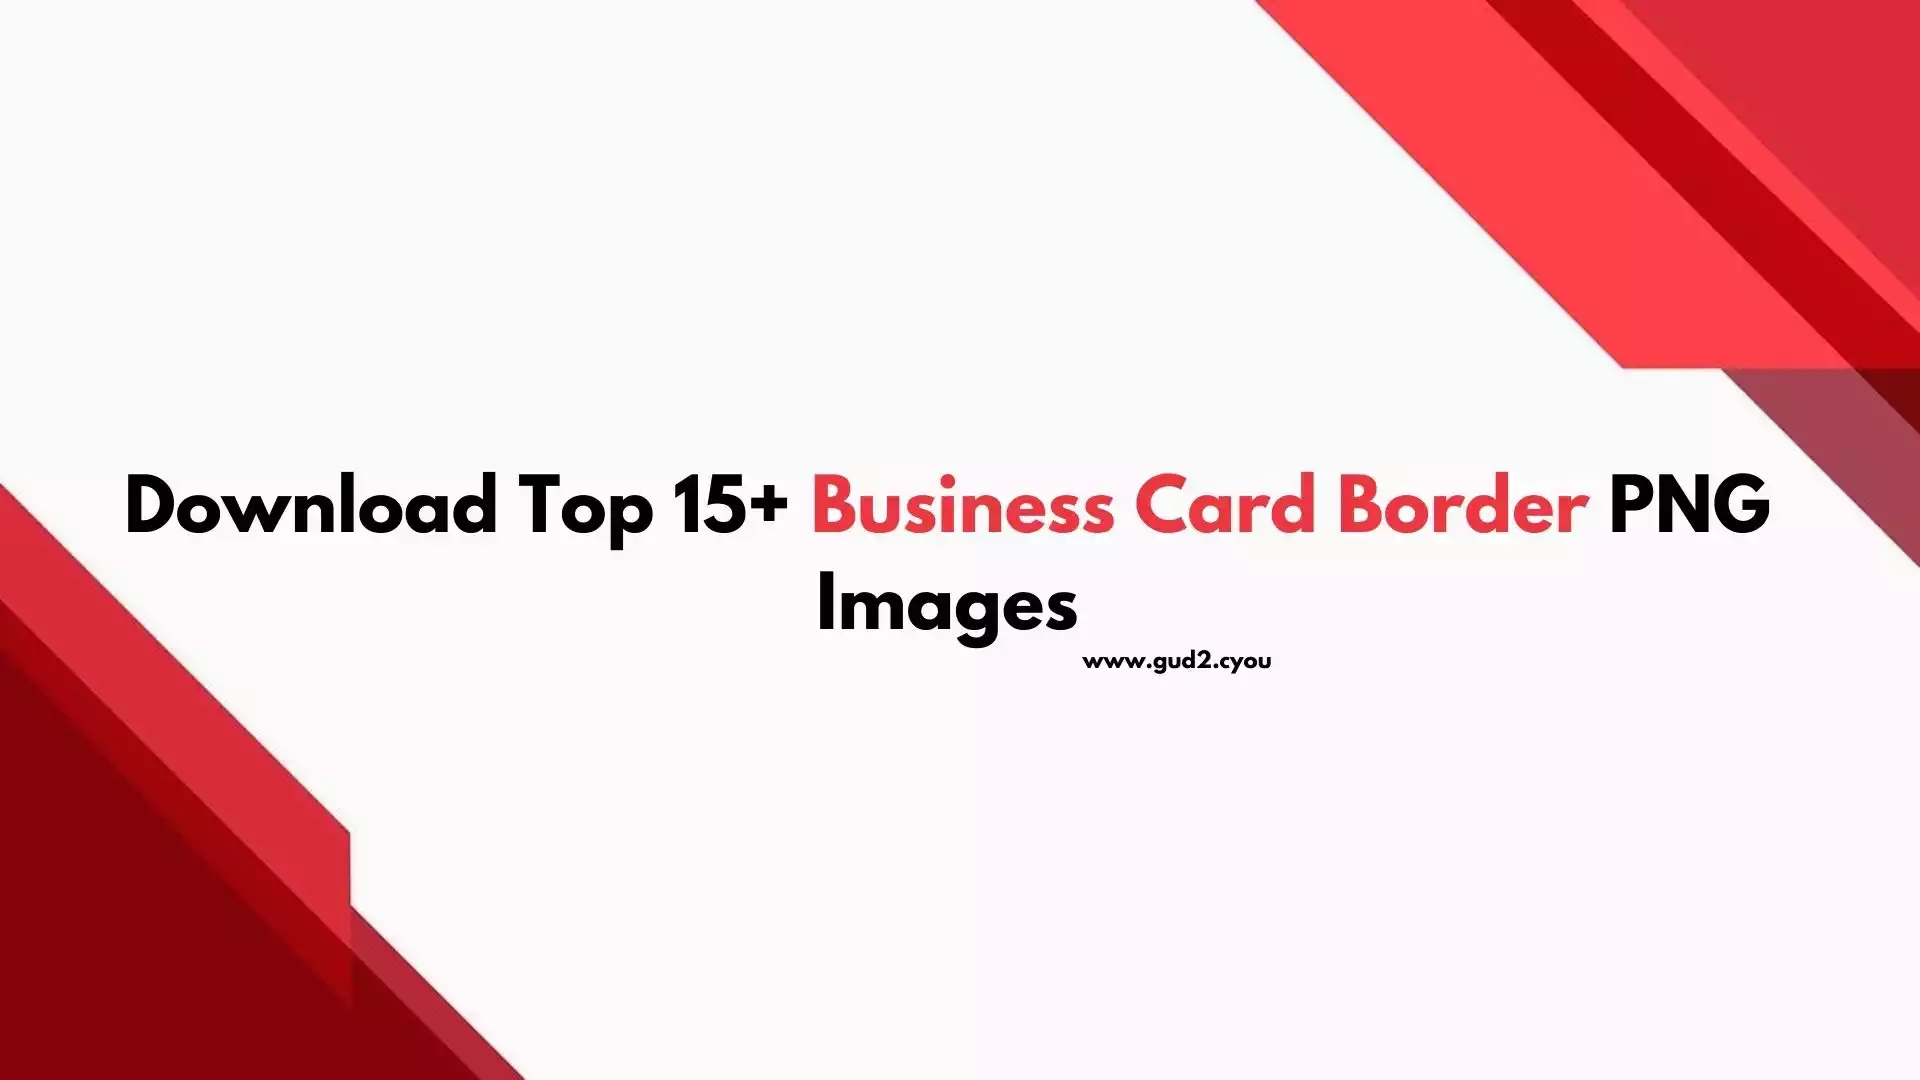 Business Card Border PNG